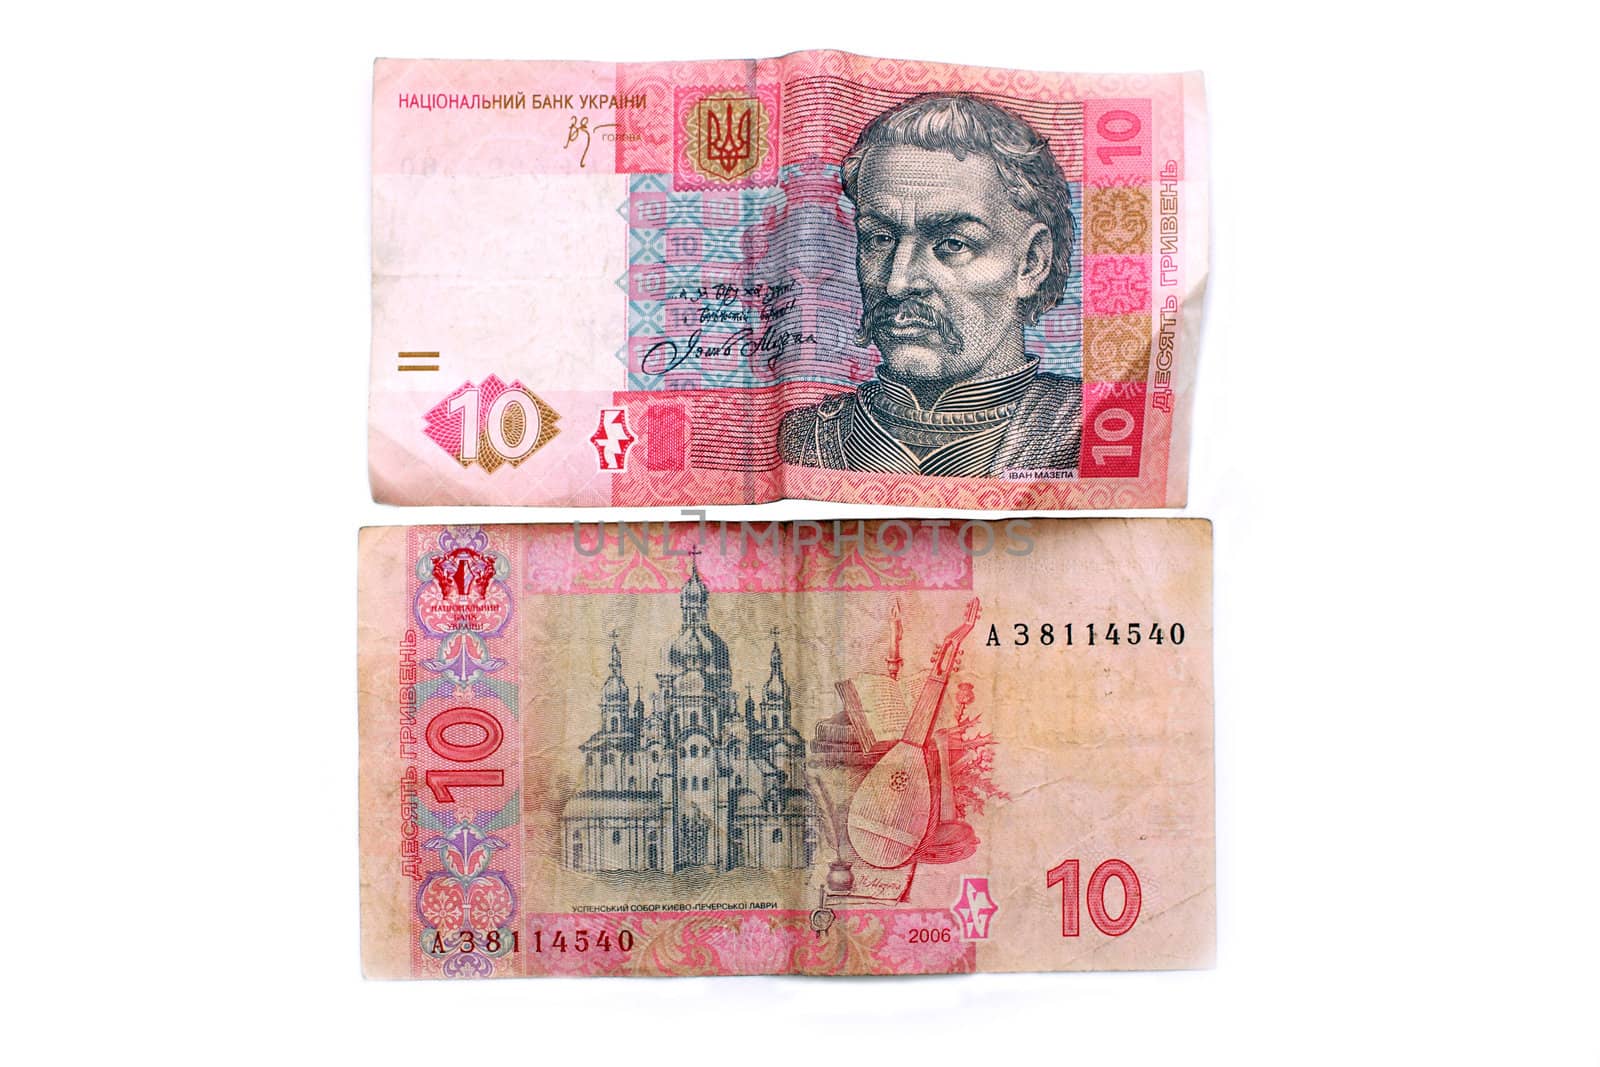 Ukrainian banknotes in ten hryvnias from both sides on white